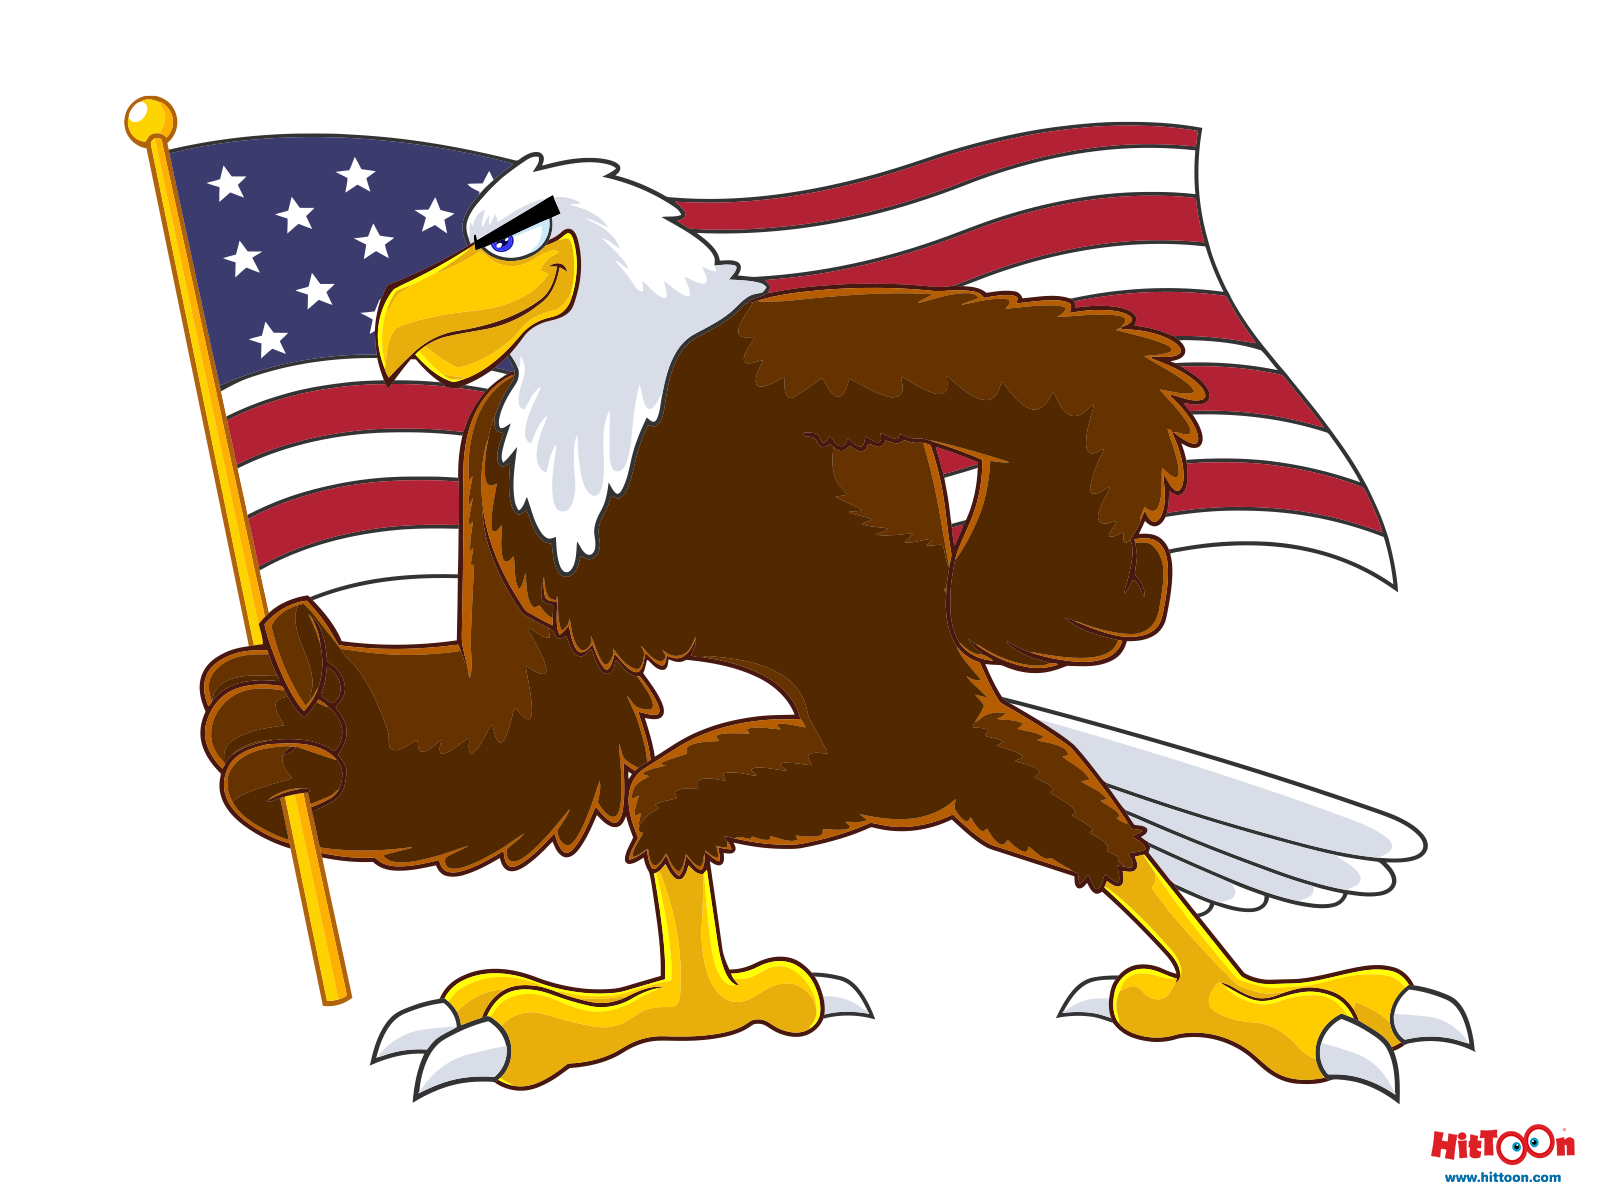 Eagle Cartoon Character With USA Flag by Hit Toon on Dribbble